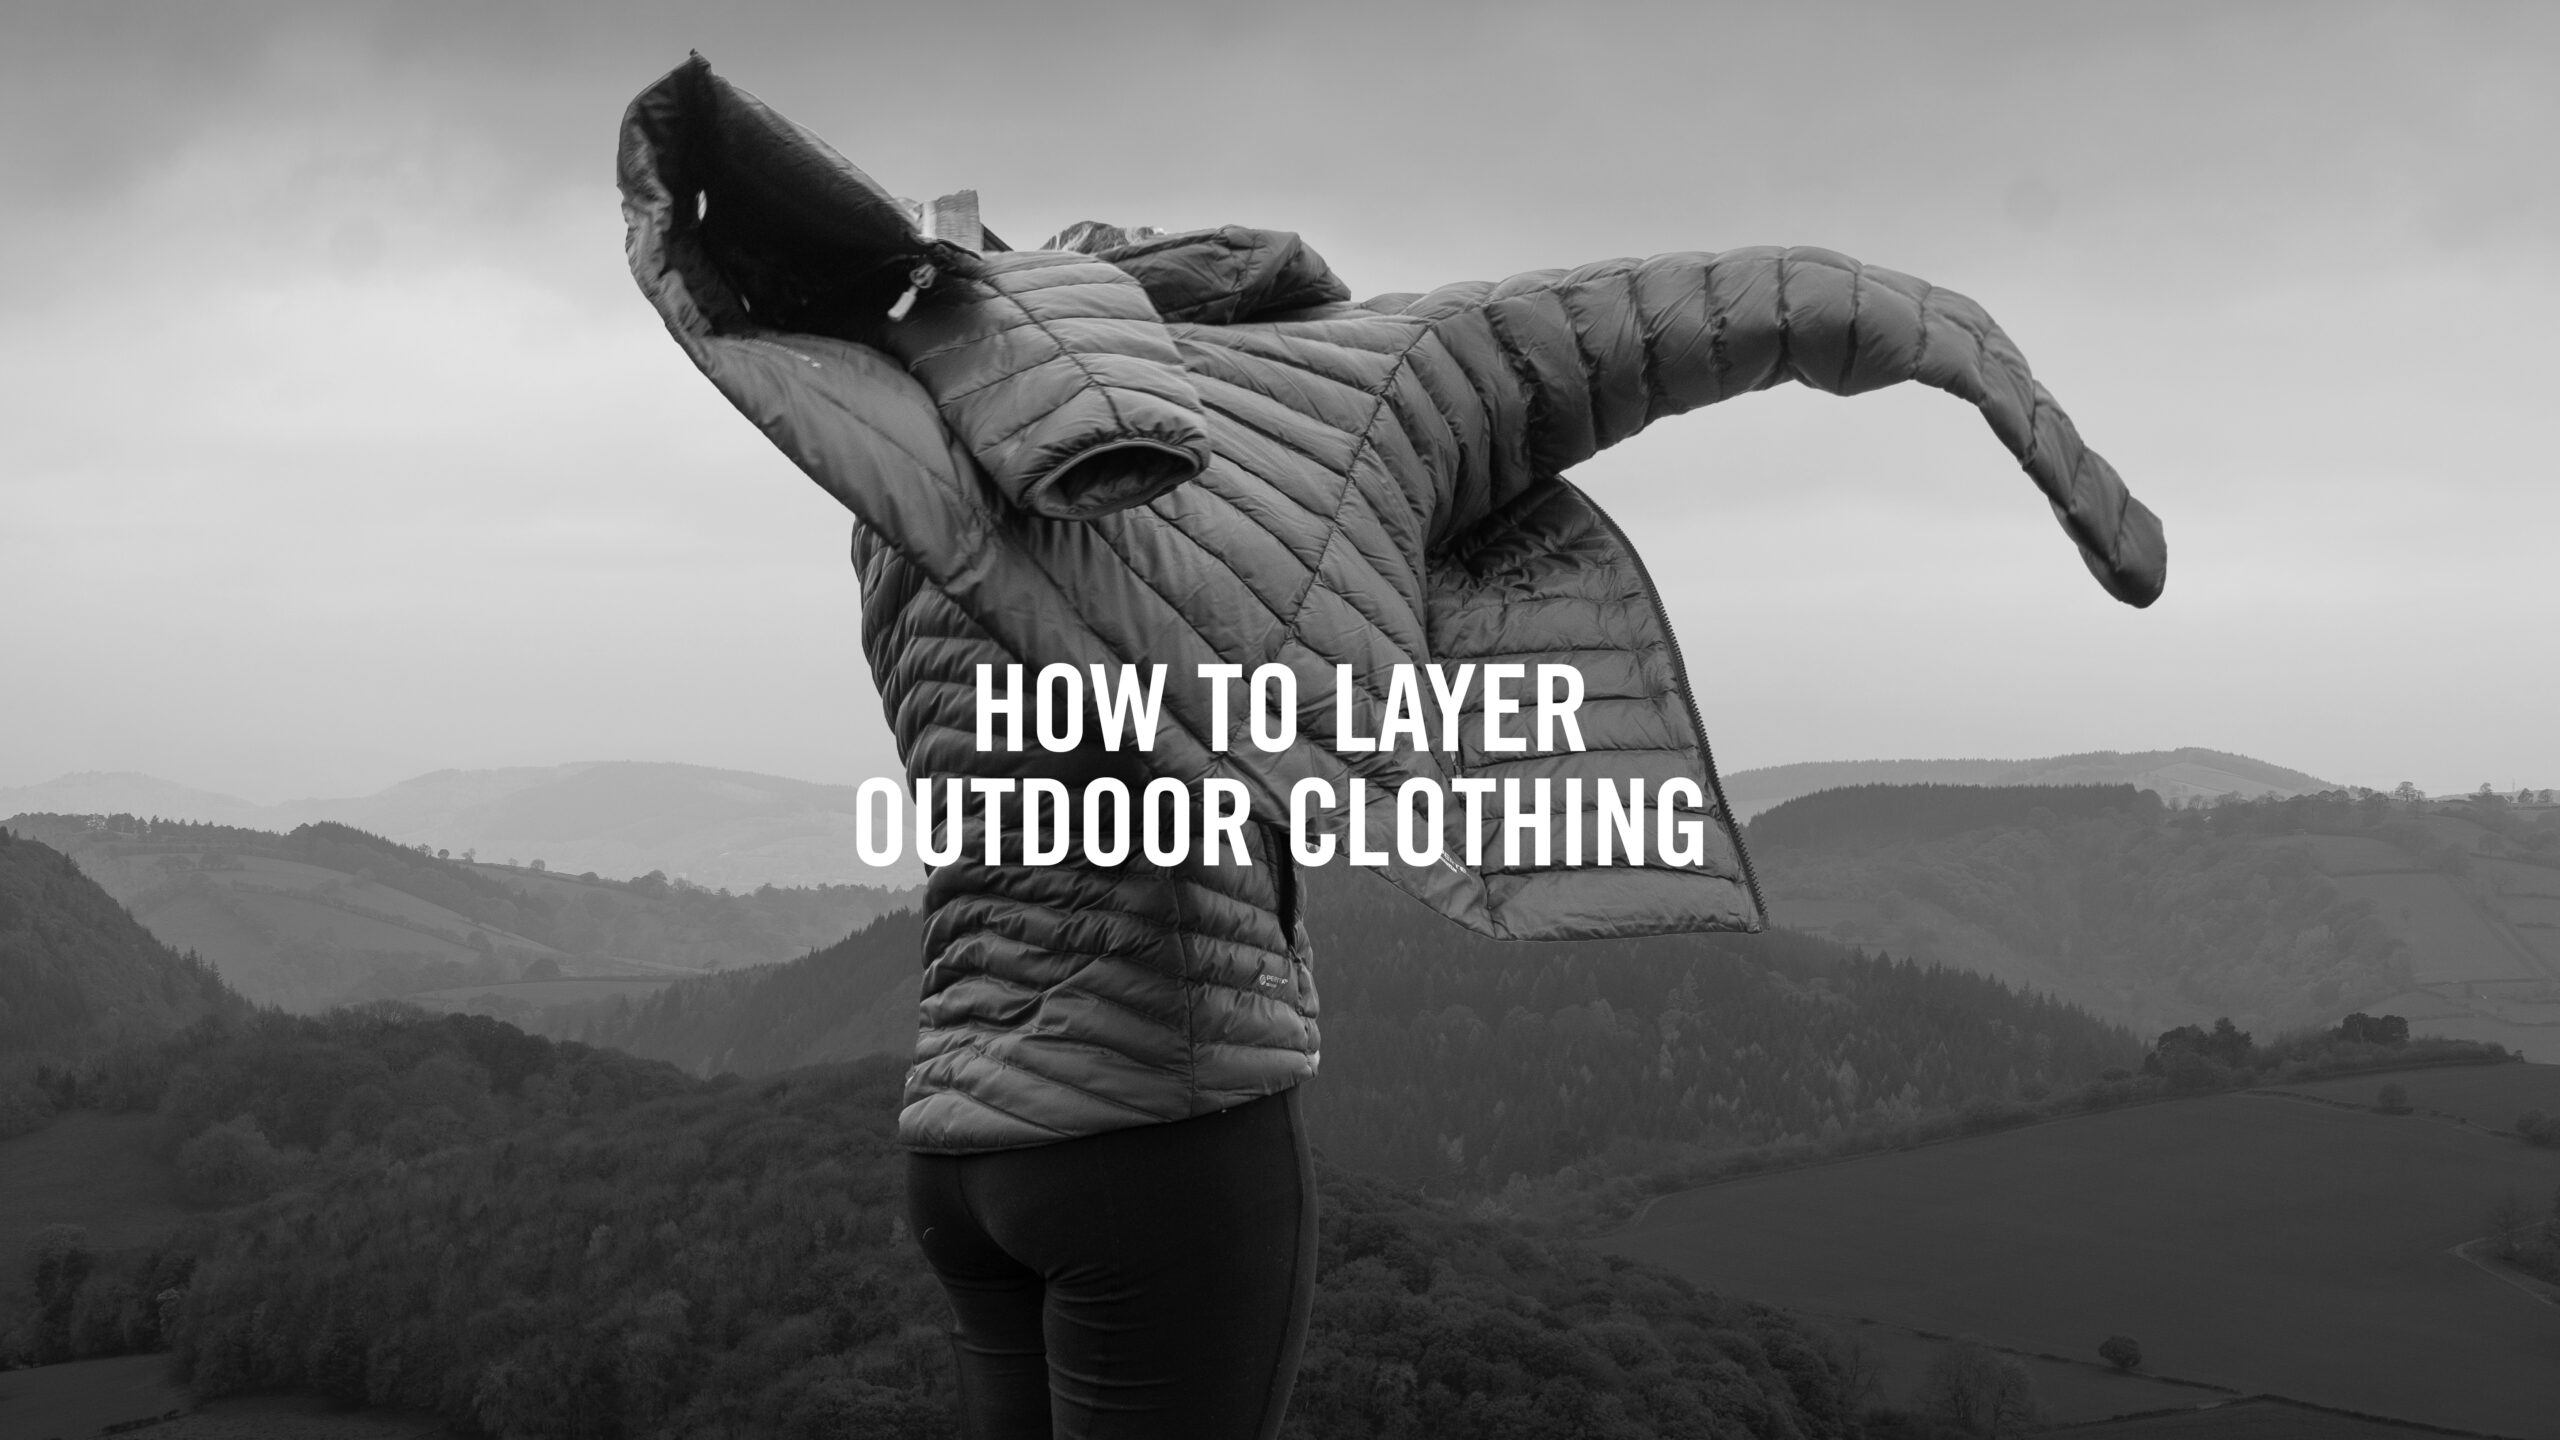 How to layer outdoor clothing